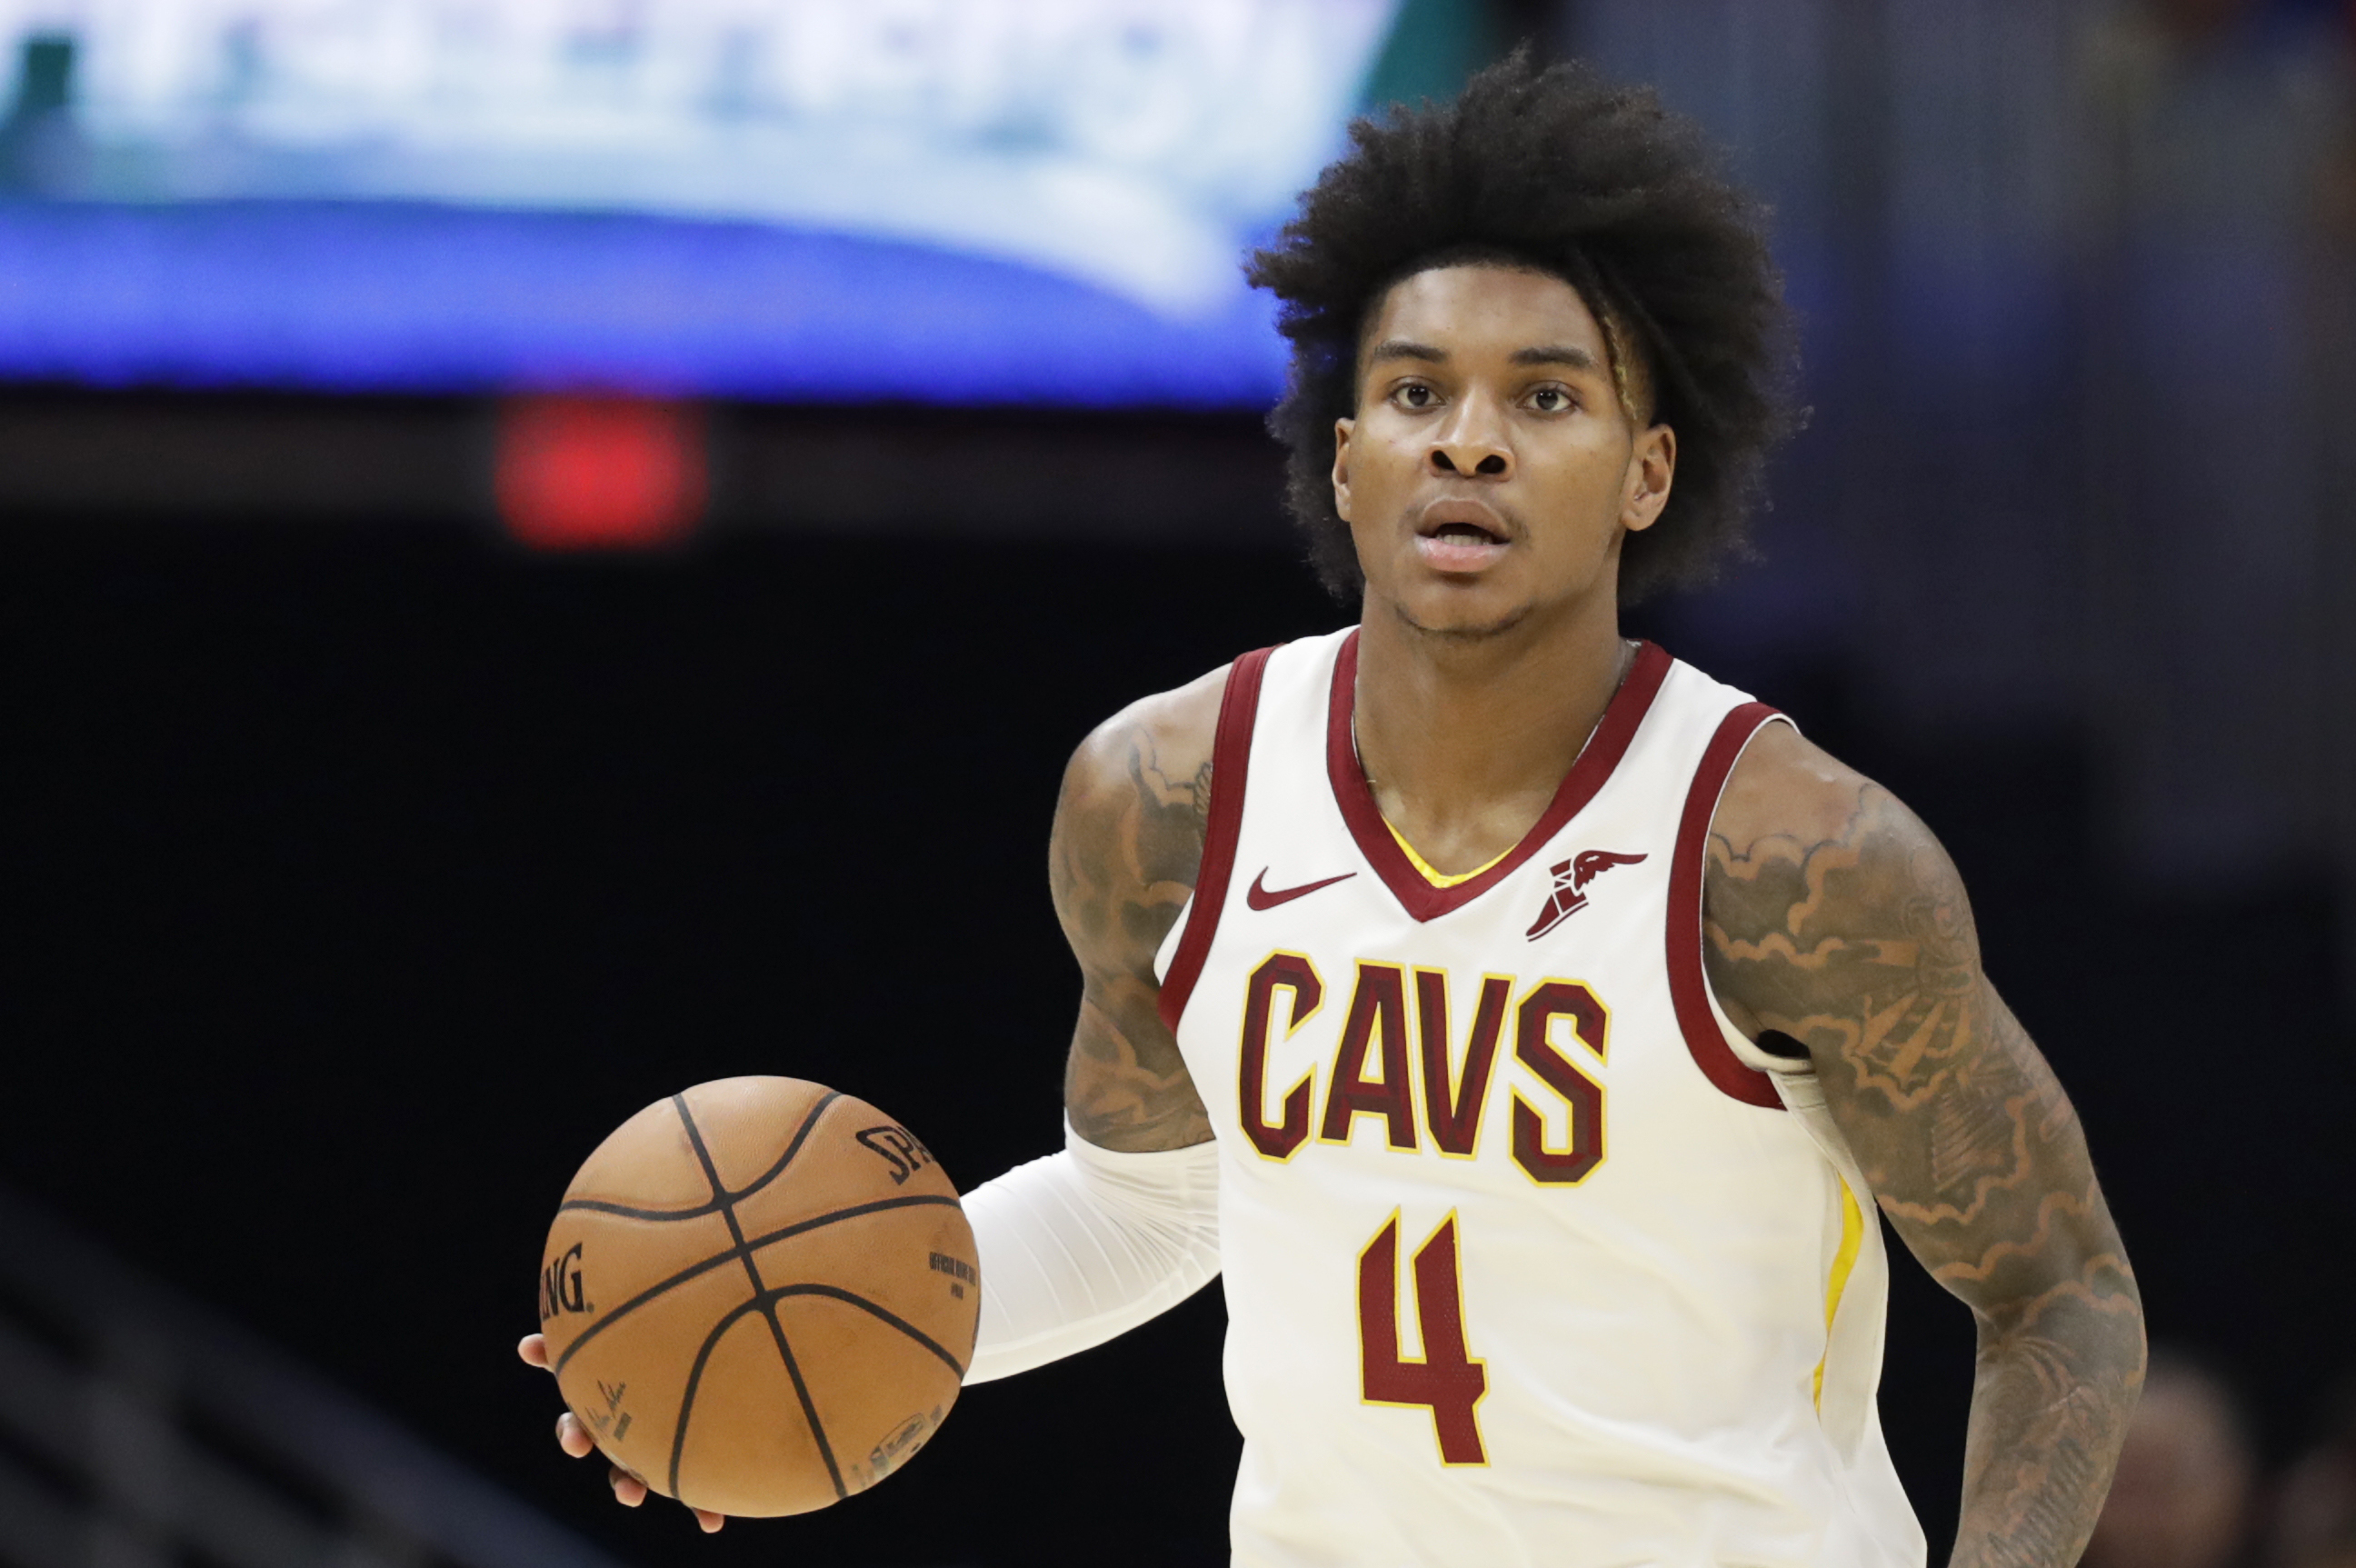 Kevin Porter Jr.'s playing status to be evaluated after weapons